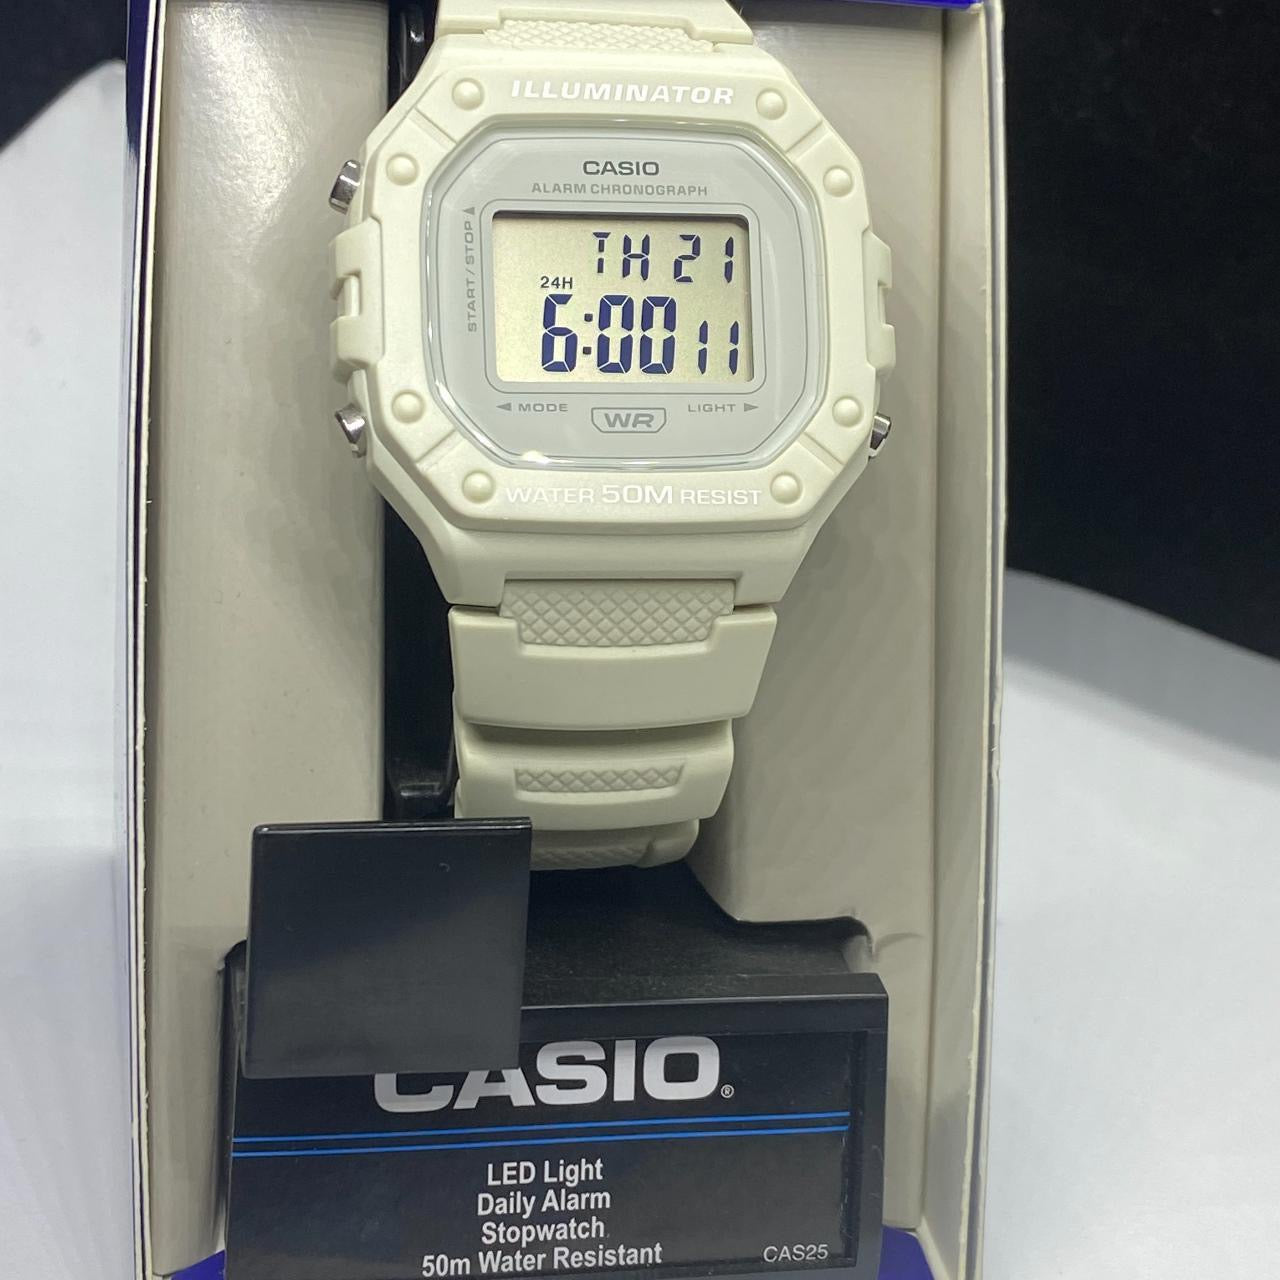 CASIO SPORTS WATCH&nbsp; FOR MEN OR FOR TEEN&nbsp;  40 MM DIAMETER CASUAL WORK OR DAILY WATCH&nbsp;  BRAND NEW ITEM&nbsp;  9 INCHES ROUND LONG&nbsp;  NEW ITEM , NEW BATTERY , LIGHT, TIMER, STOP WATCH&nbsp;